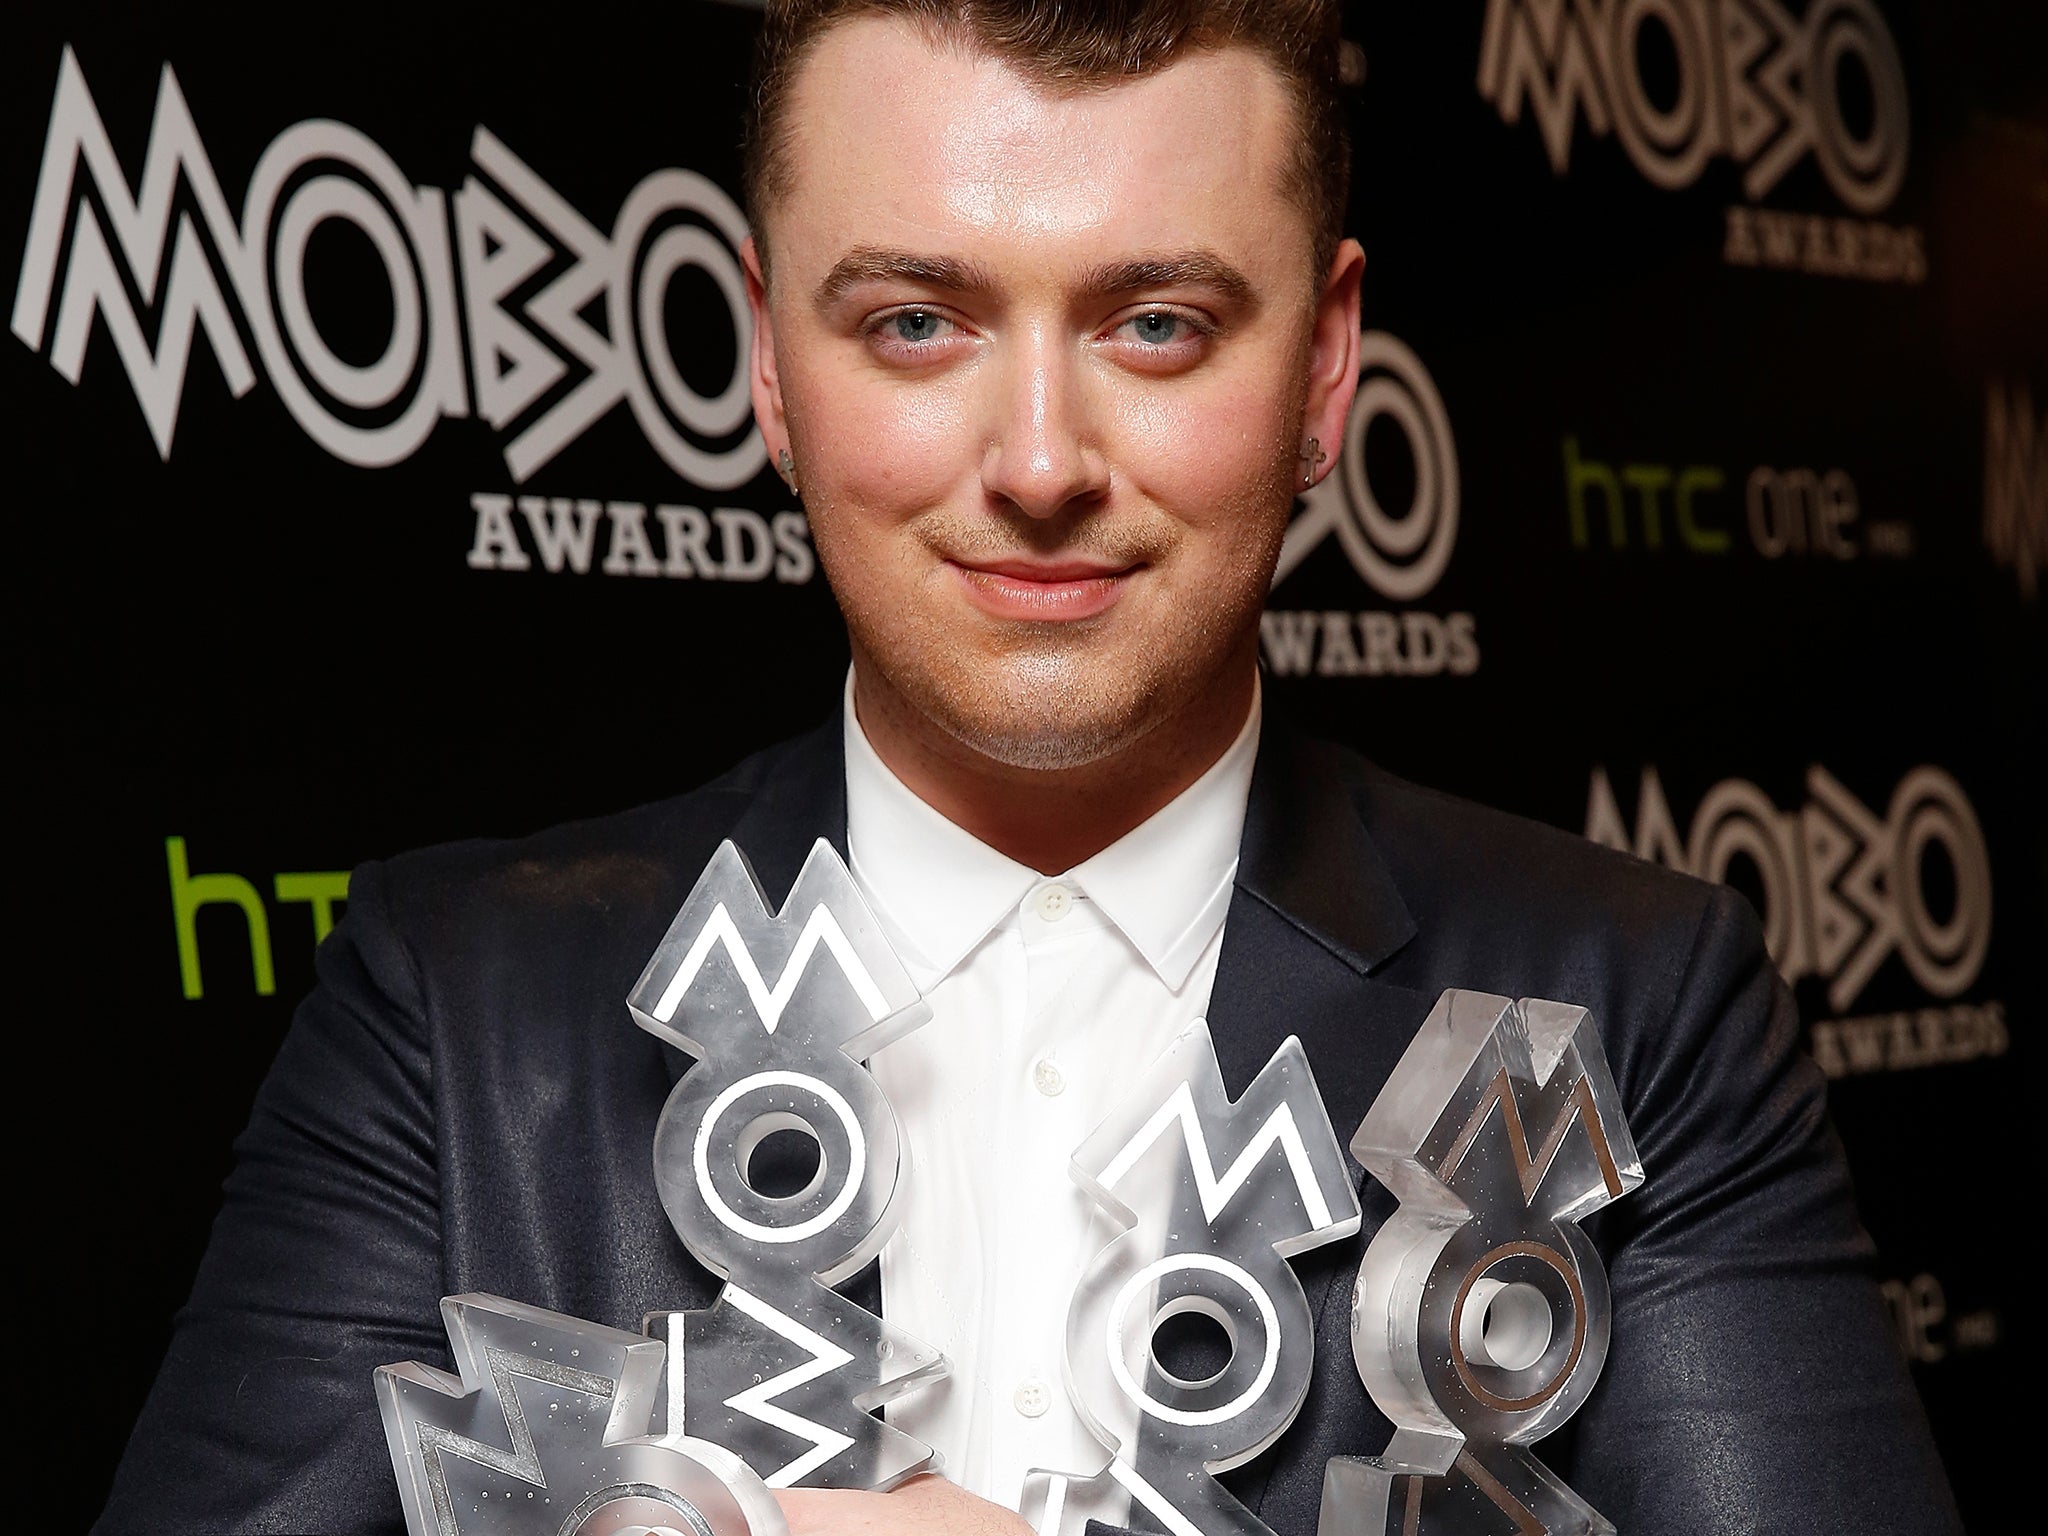 Soul singer Sam Smith cleared up at the Mobo awards this week